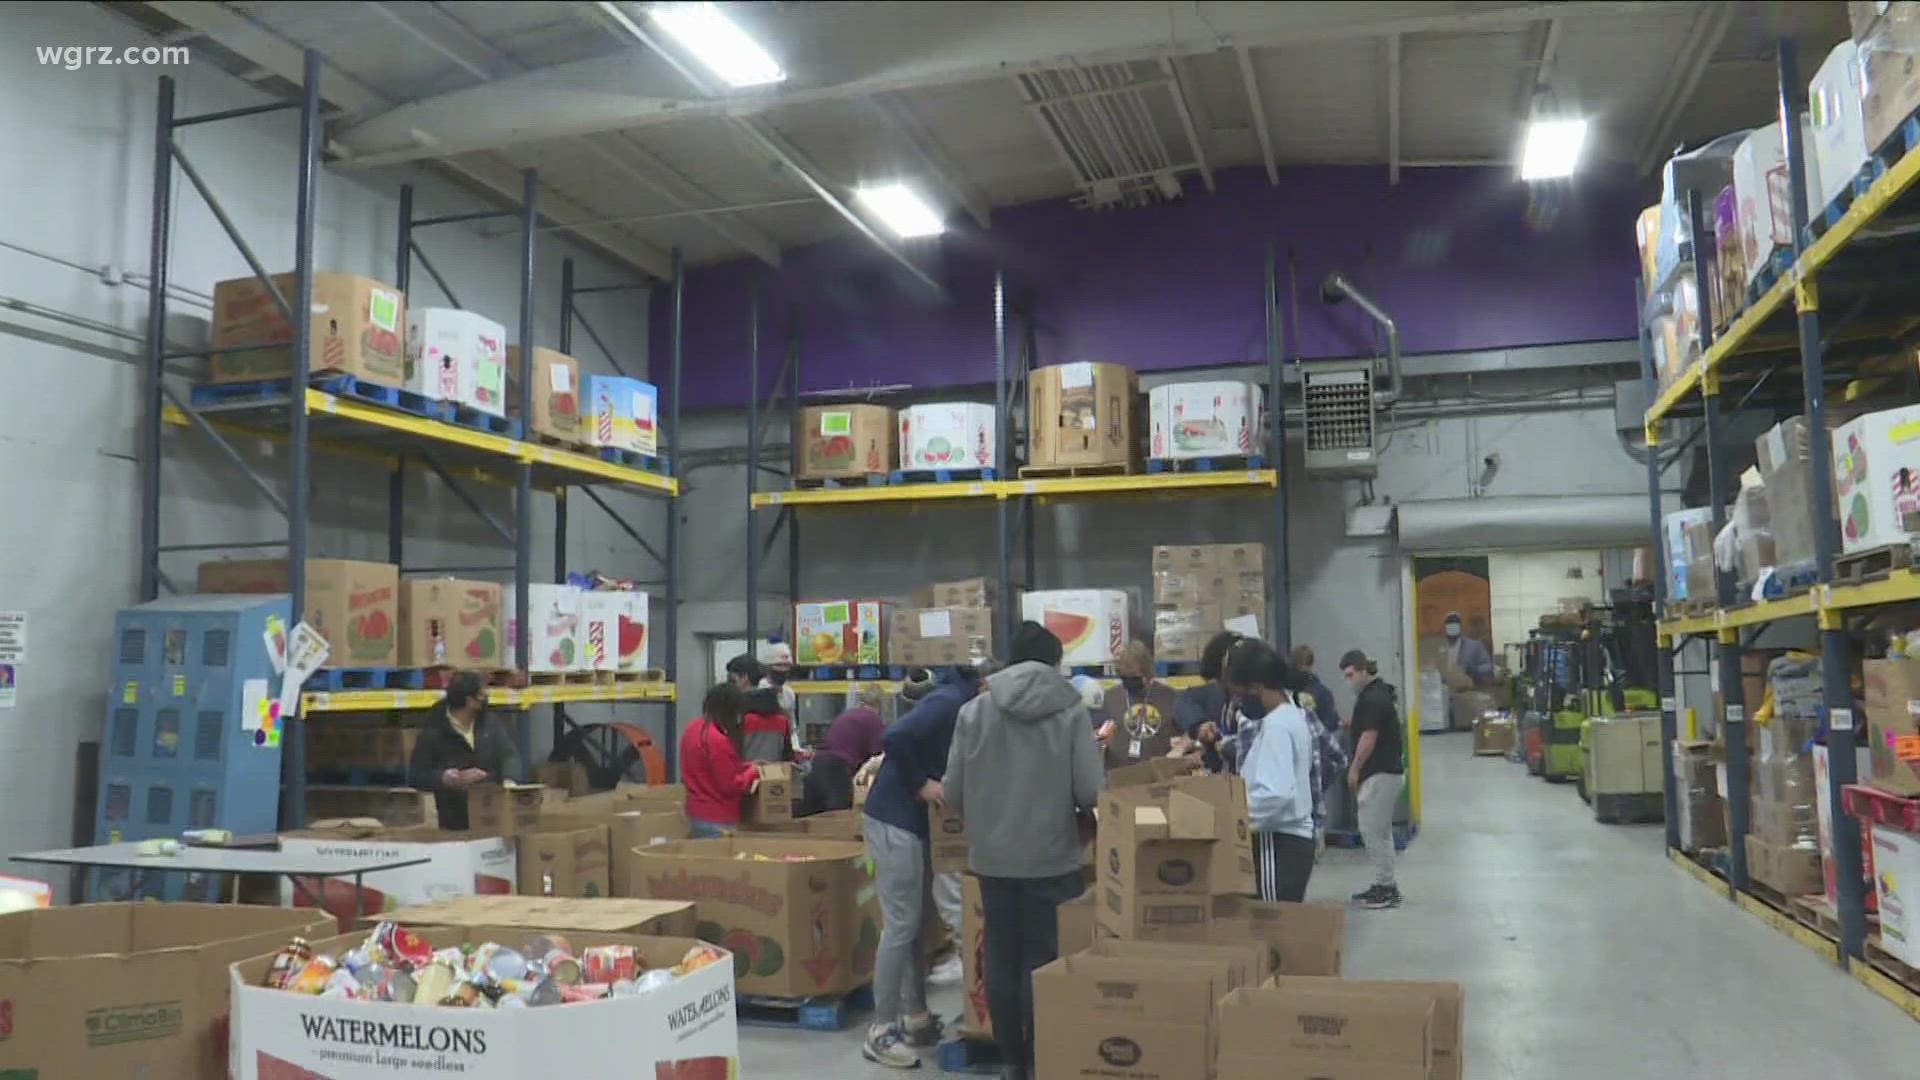 The team at FeedMore Western New York is busy wrapping up after Friday's Food 2 Families Drive.